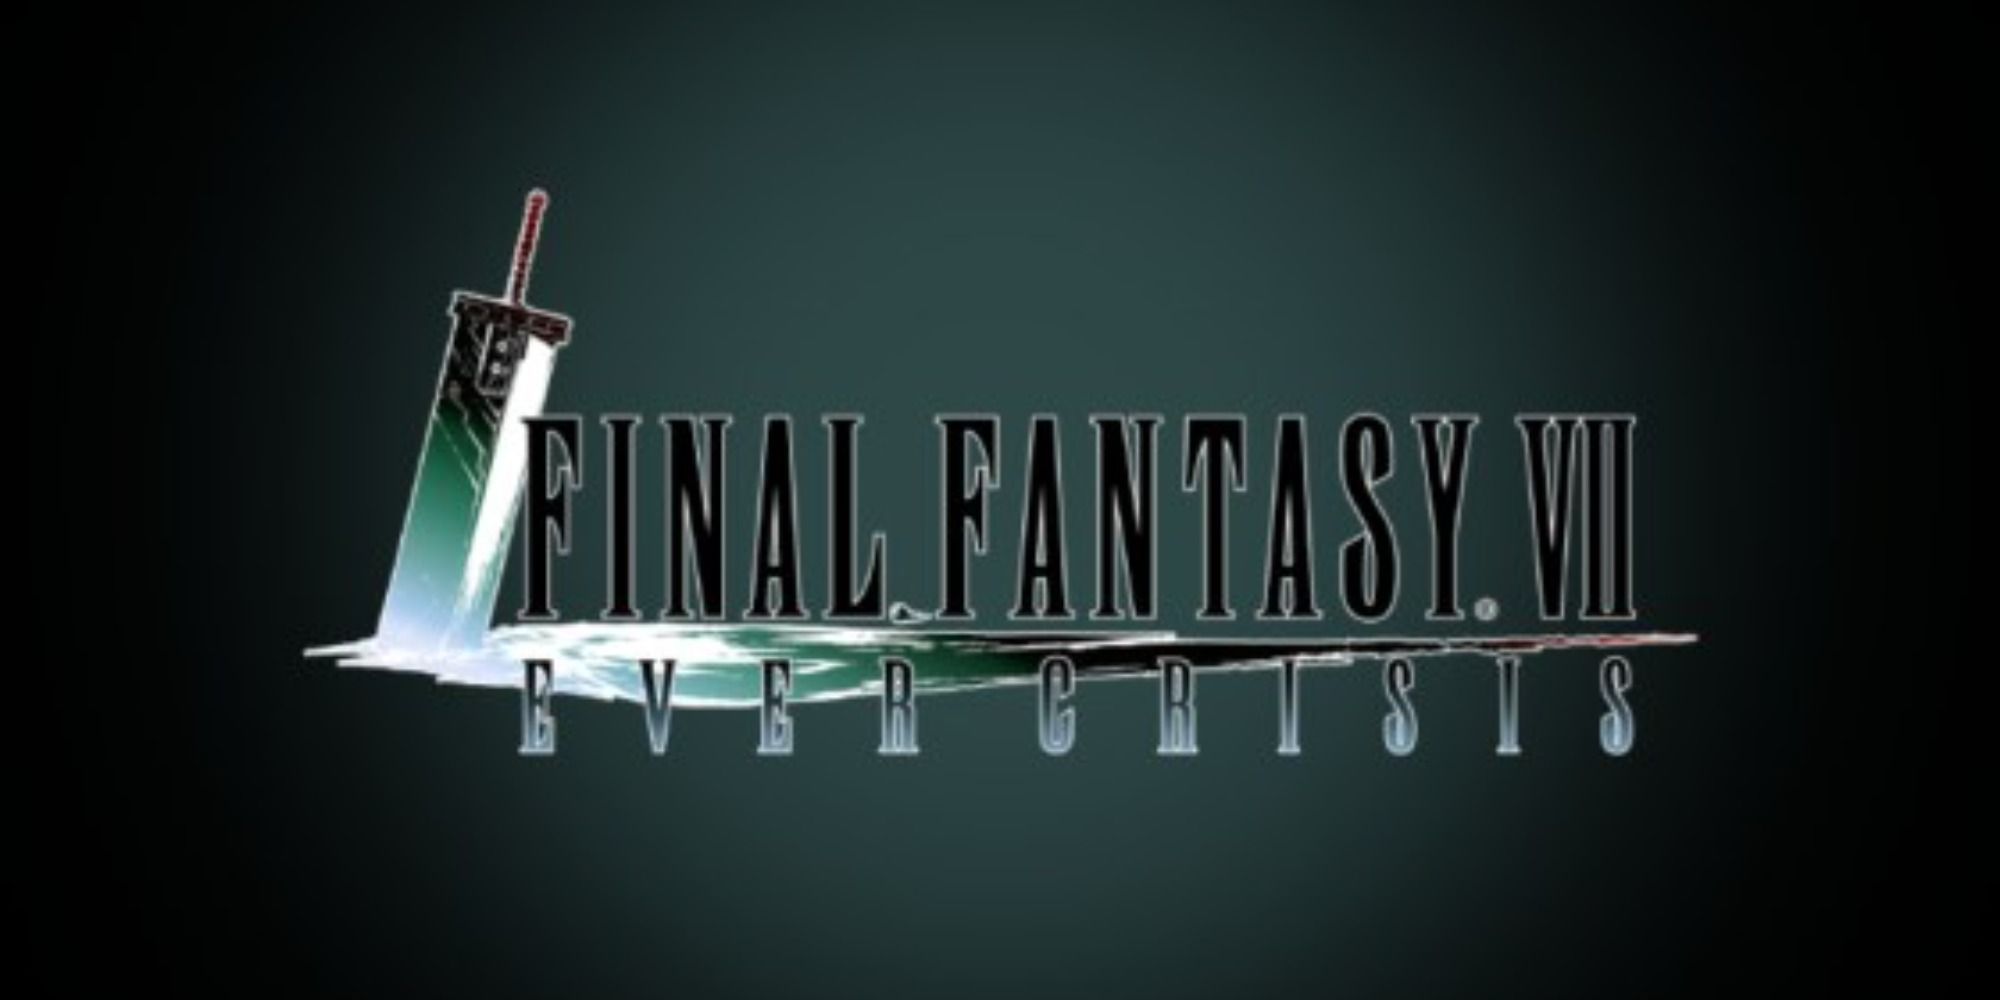 Final Fantasy VII: Ever Crisis has so much potential